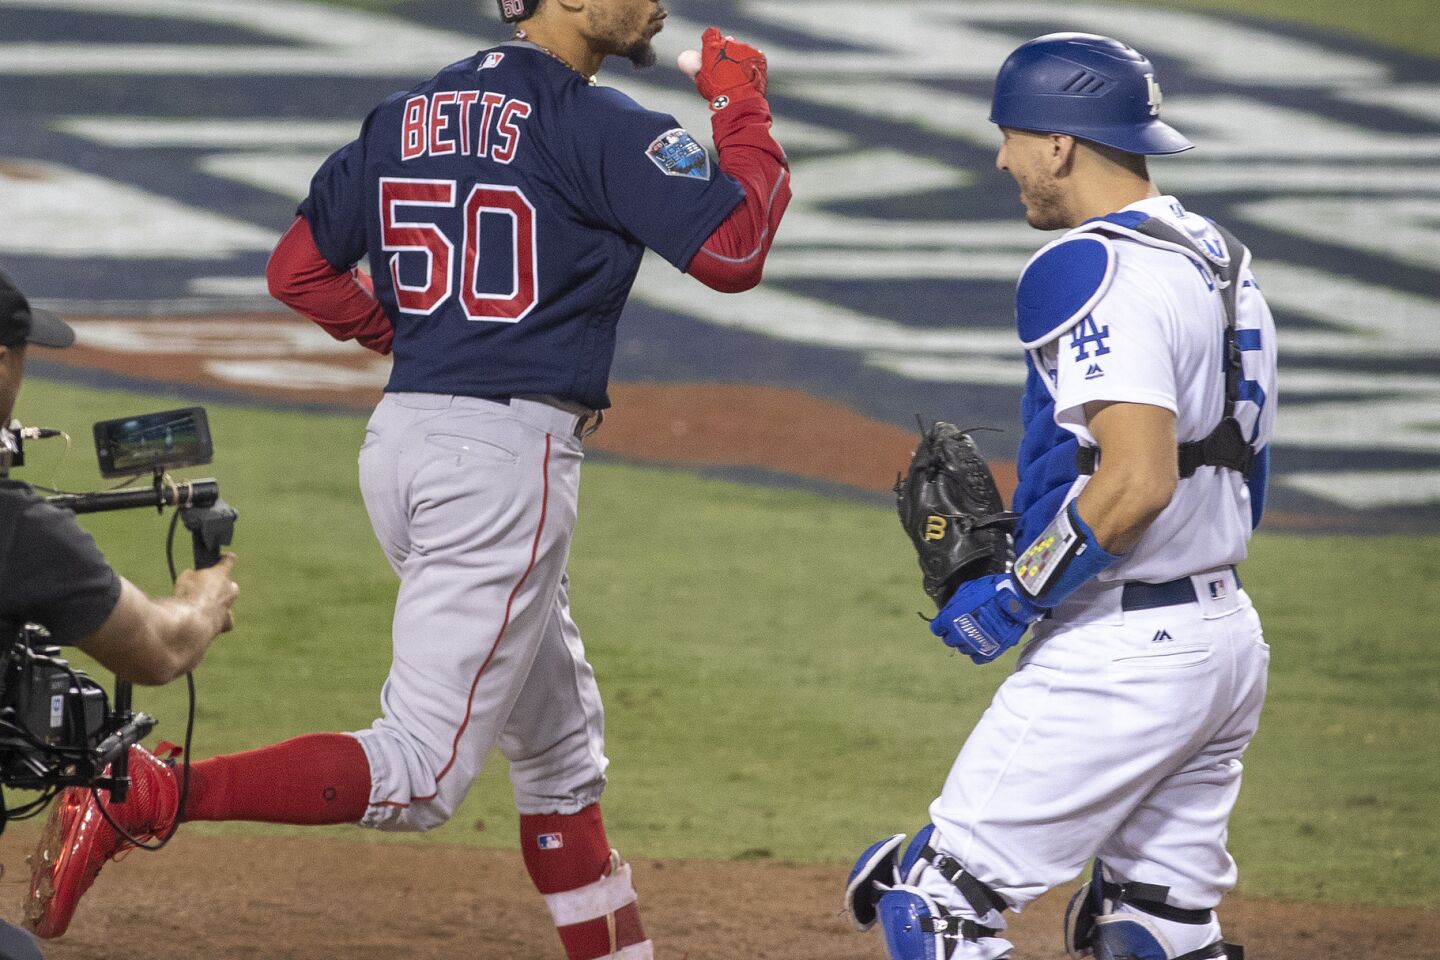 Dodgers catcher Austin Barnes looks away as Red Sox center fielder Mookie Betts celebrates after crossing home plate during his home-run trot in the sixth inning.